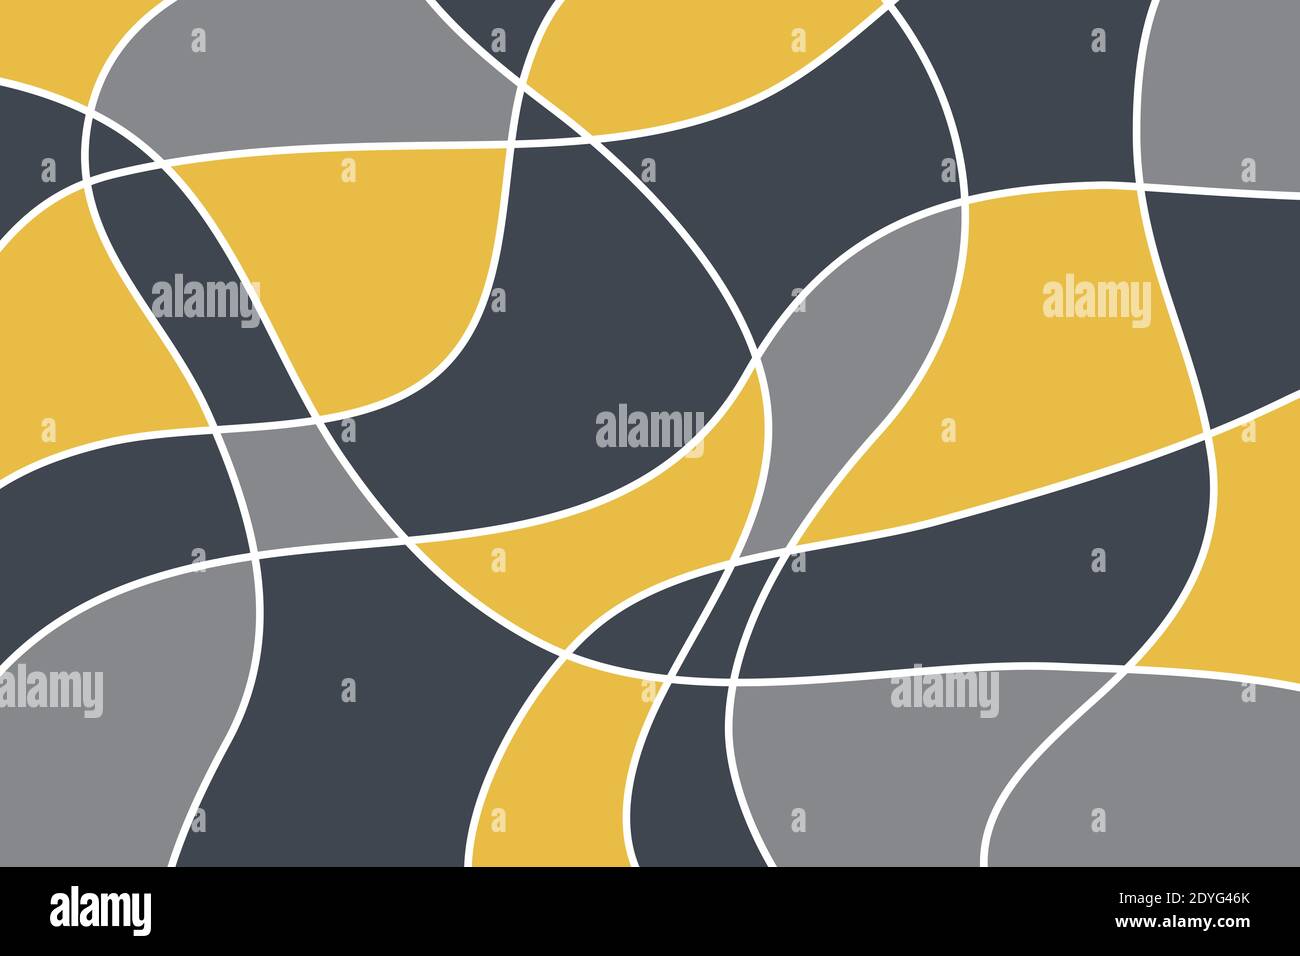 Abstract background pattern made with curvy geometric shapes. Modern, simple and playful vector art in yellow and grey colors. Stock Photo